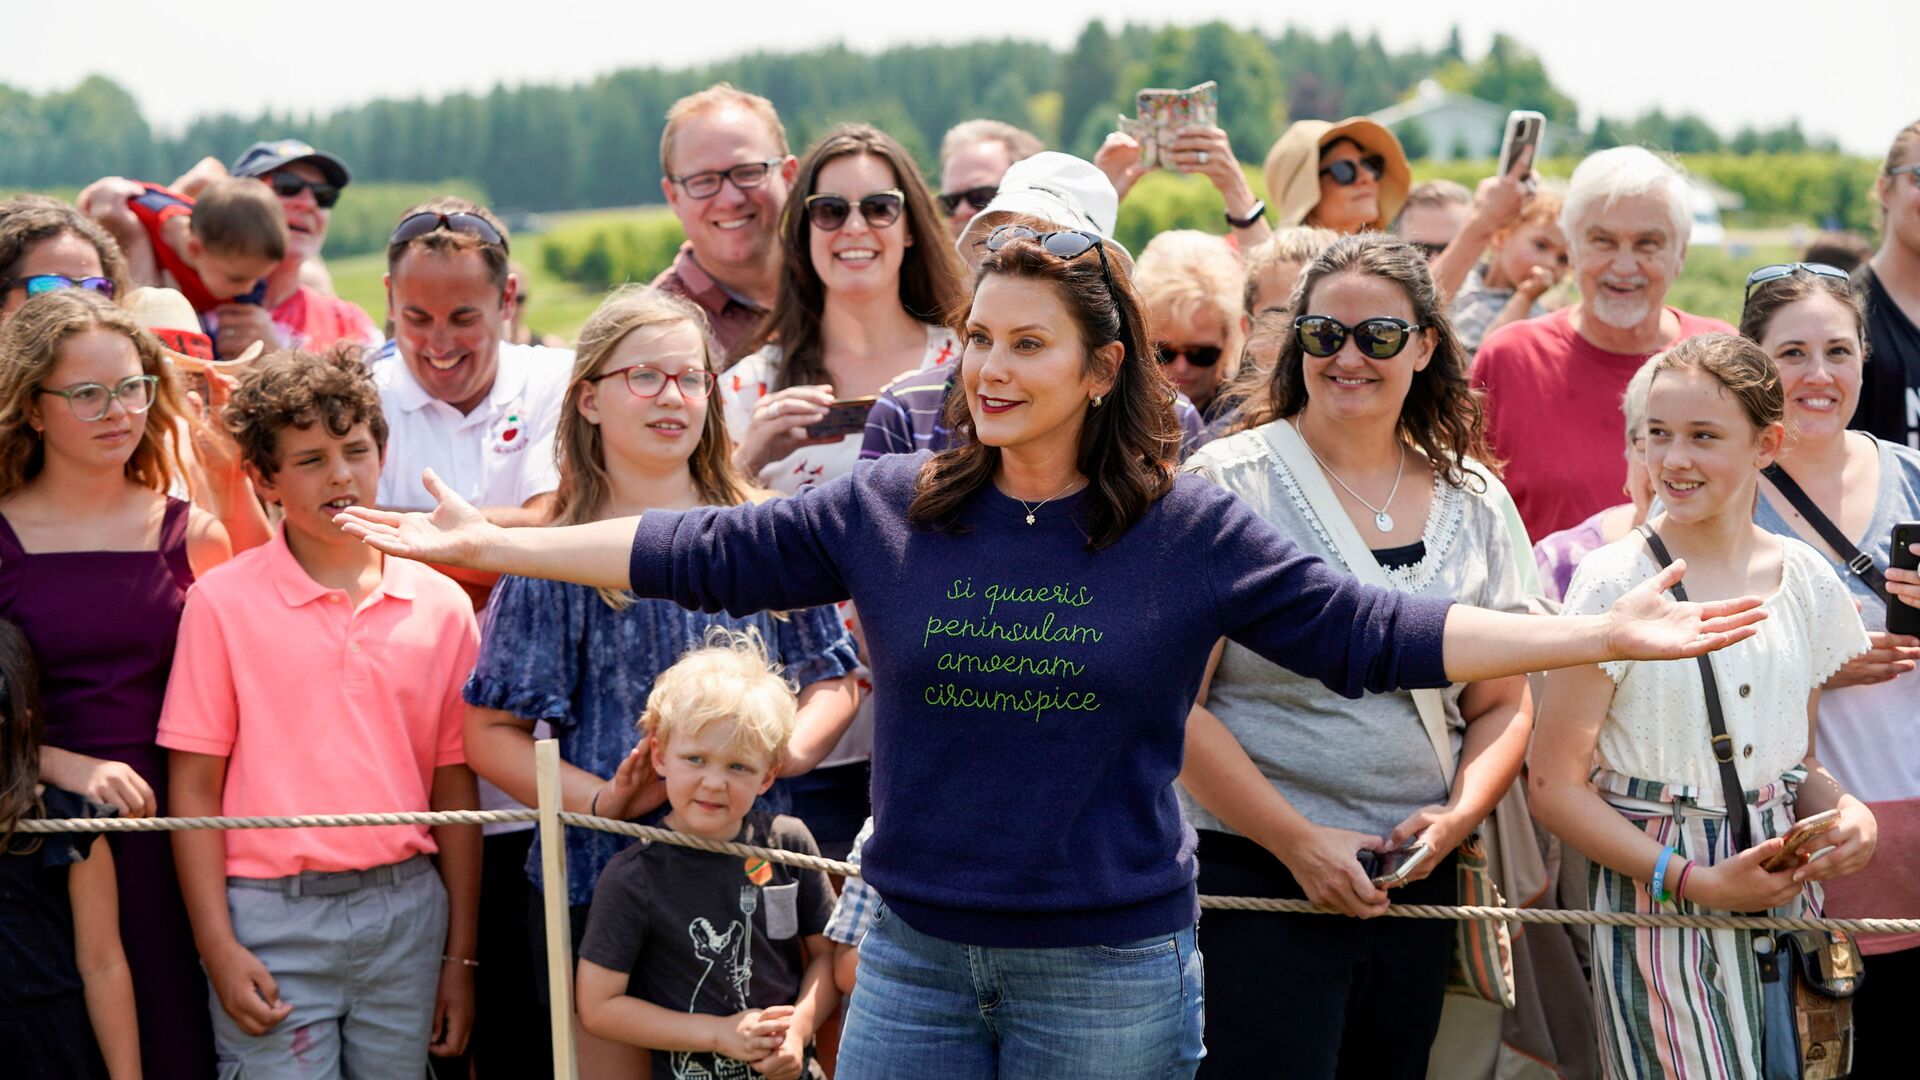 Michigan's Governor Gretchen Whitmer gestures in front of supporters after touring King Orchards farm in Central Lake, Michigan, 3 July 2021. - Sputnik International, 1920, 24.07.2021